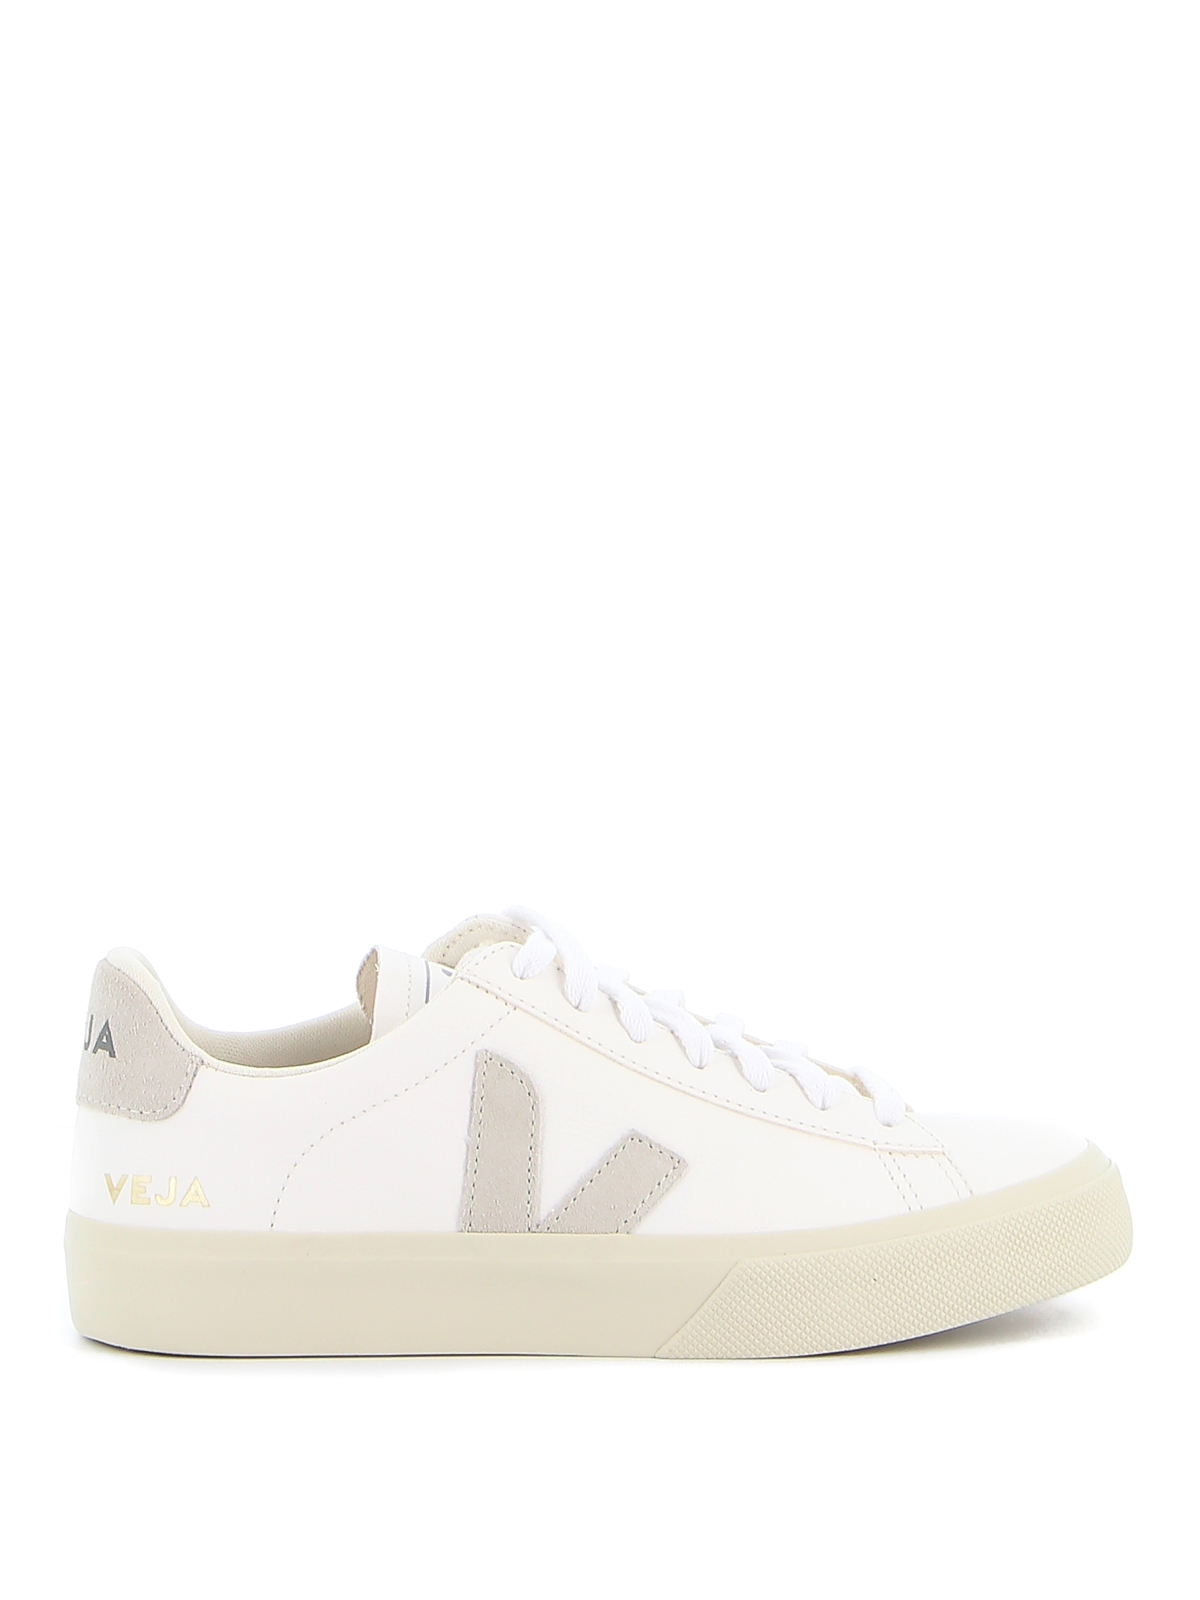 Veja Leathers CAMPO CALFSKIN SNEAKERS